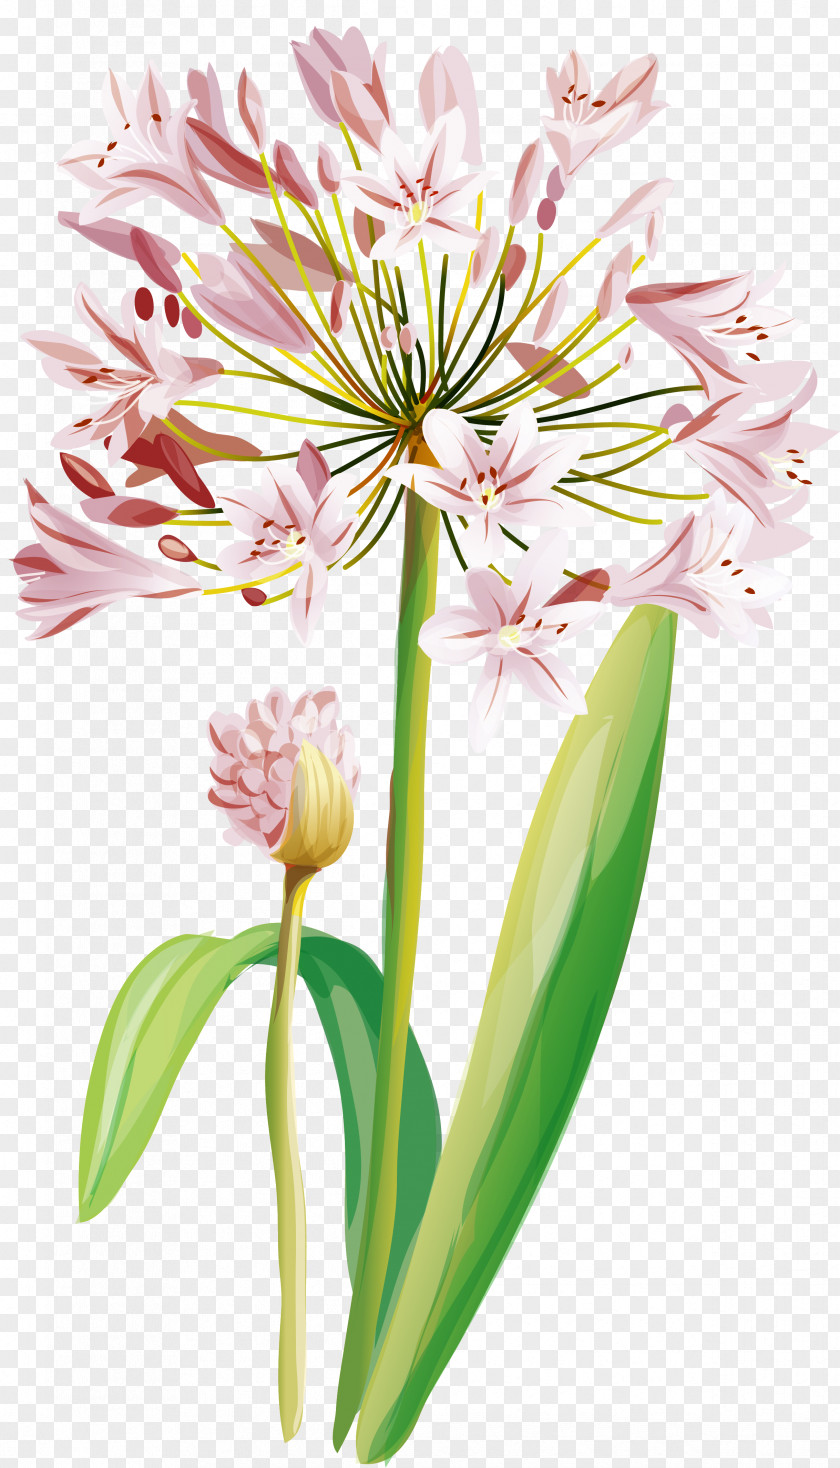 Flower Vector Graphics Watercolor Painting Clip Art PNG